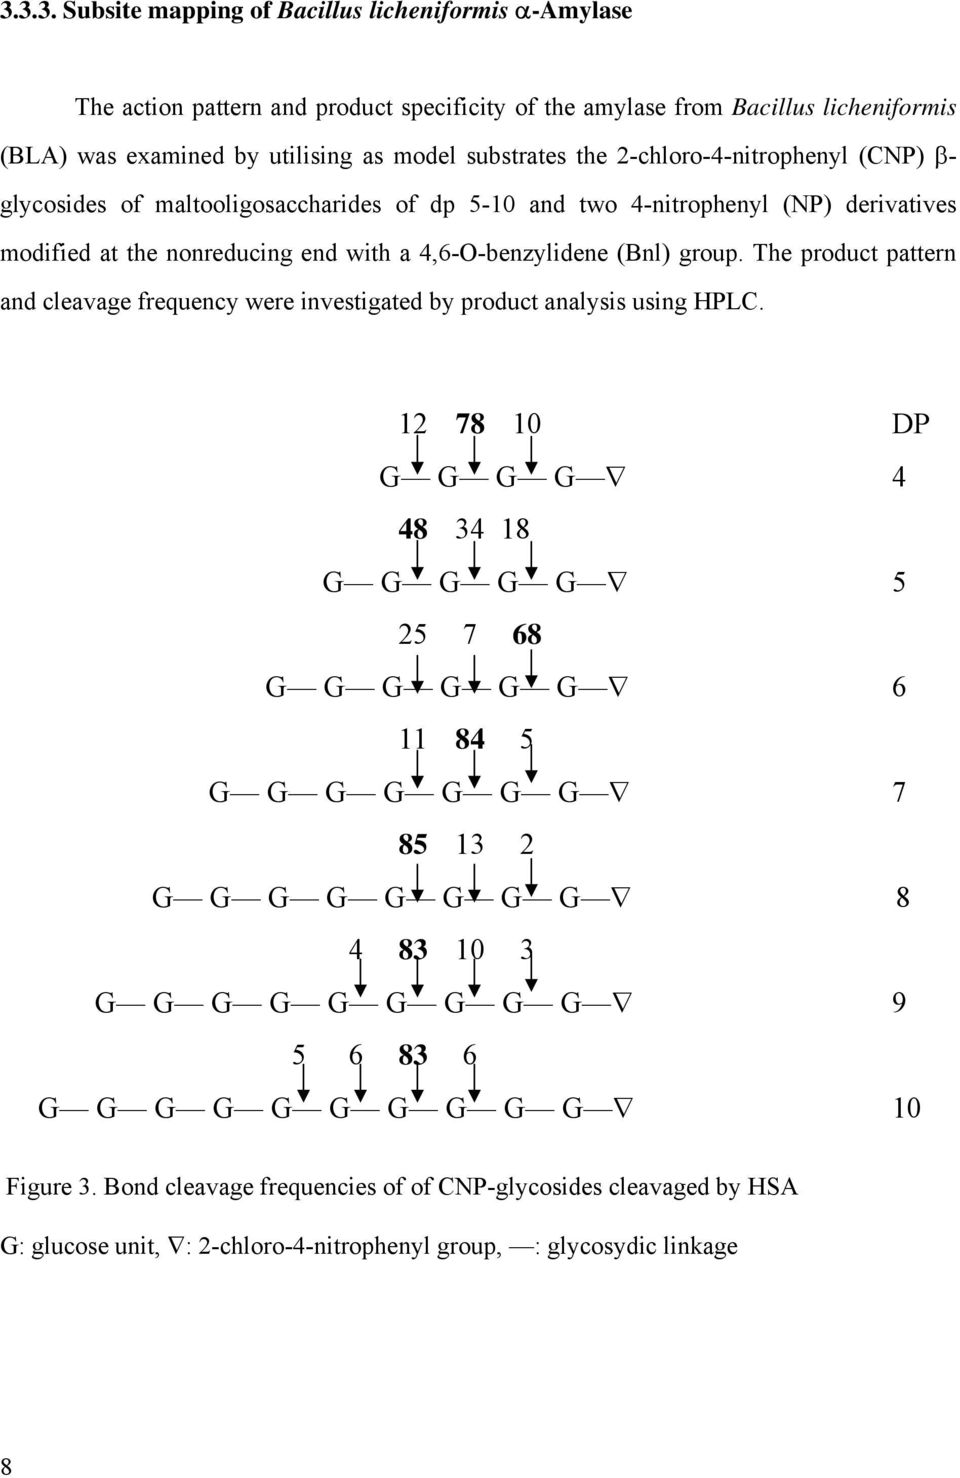 The product pattern and cleavage frequency were investigated by product analysis using HPLC.